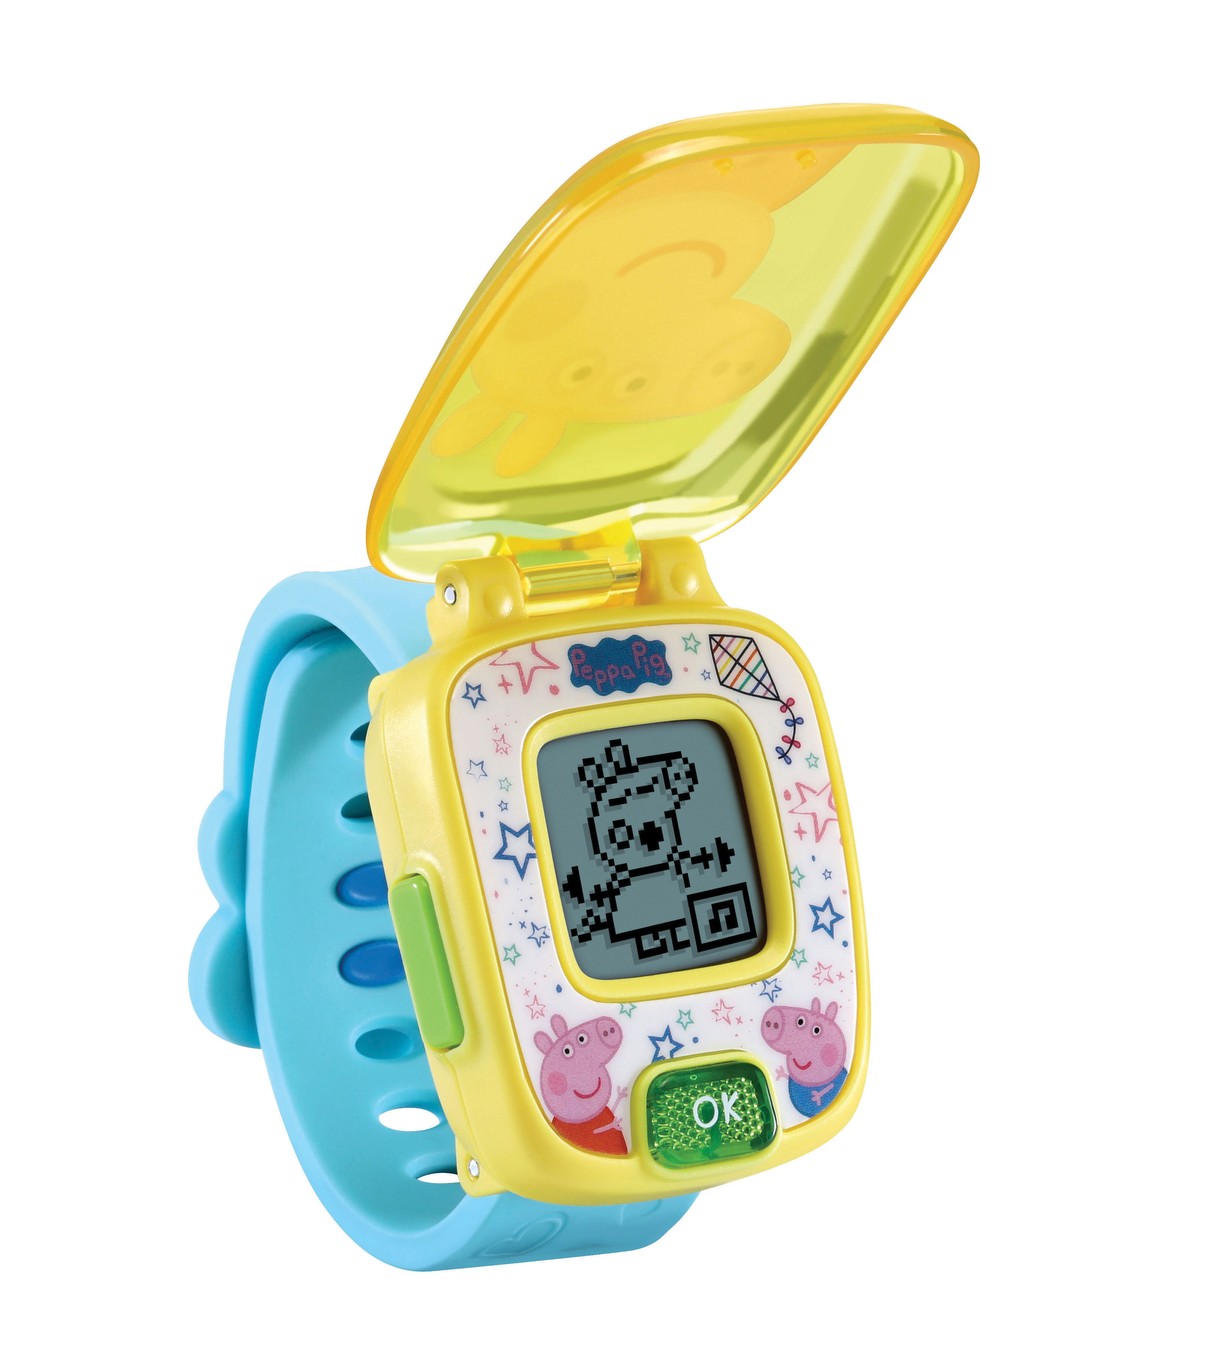 and Preschool Learning Toy with Numbers Interactive Toy Vtech Peppa Pig Watch 